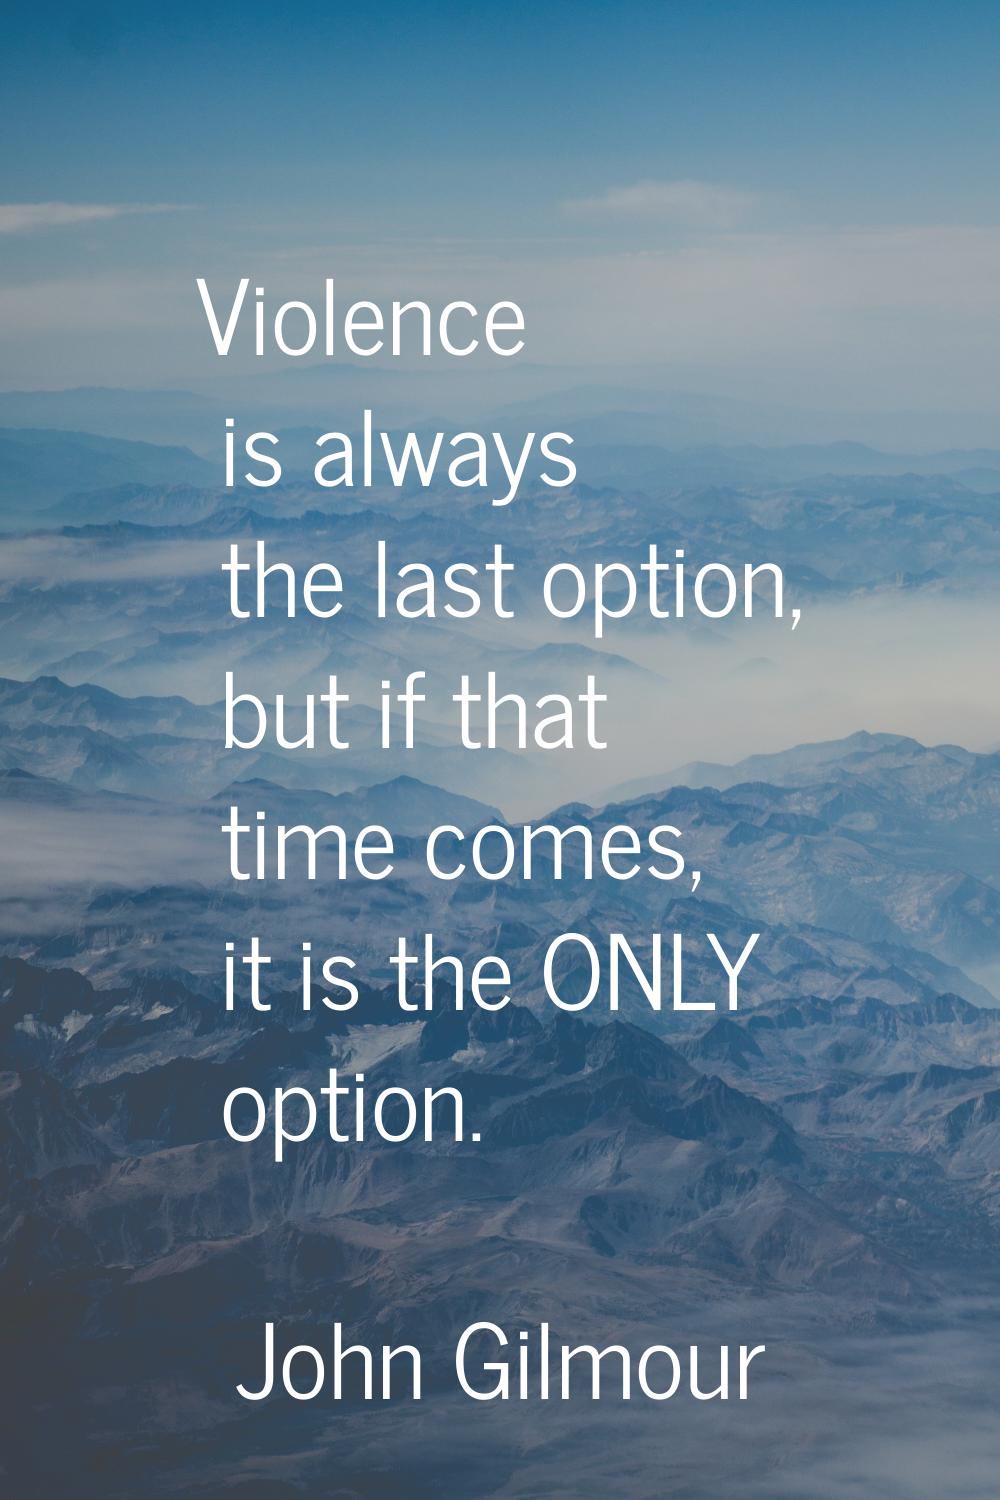 Violence is always the last option, but if that time comes, it is the ONLY option.